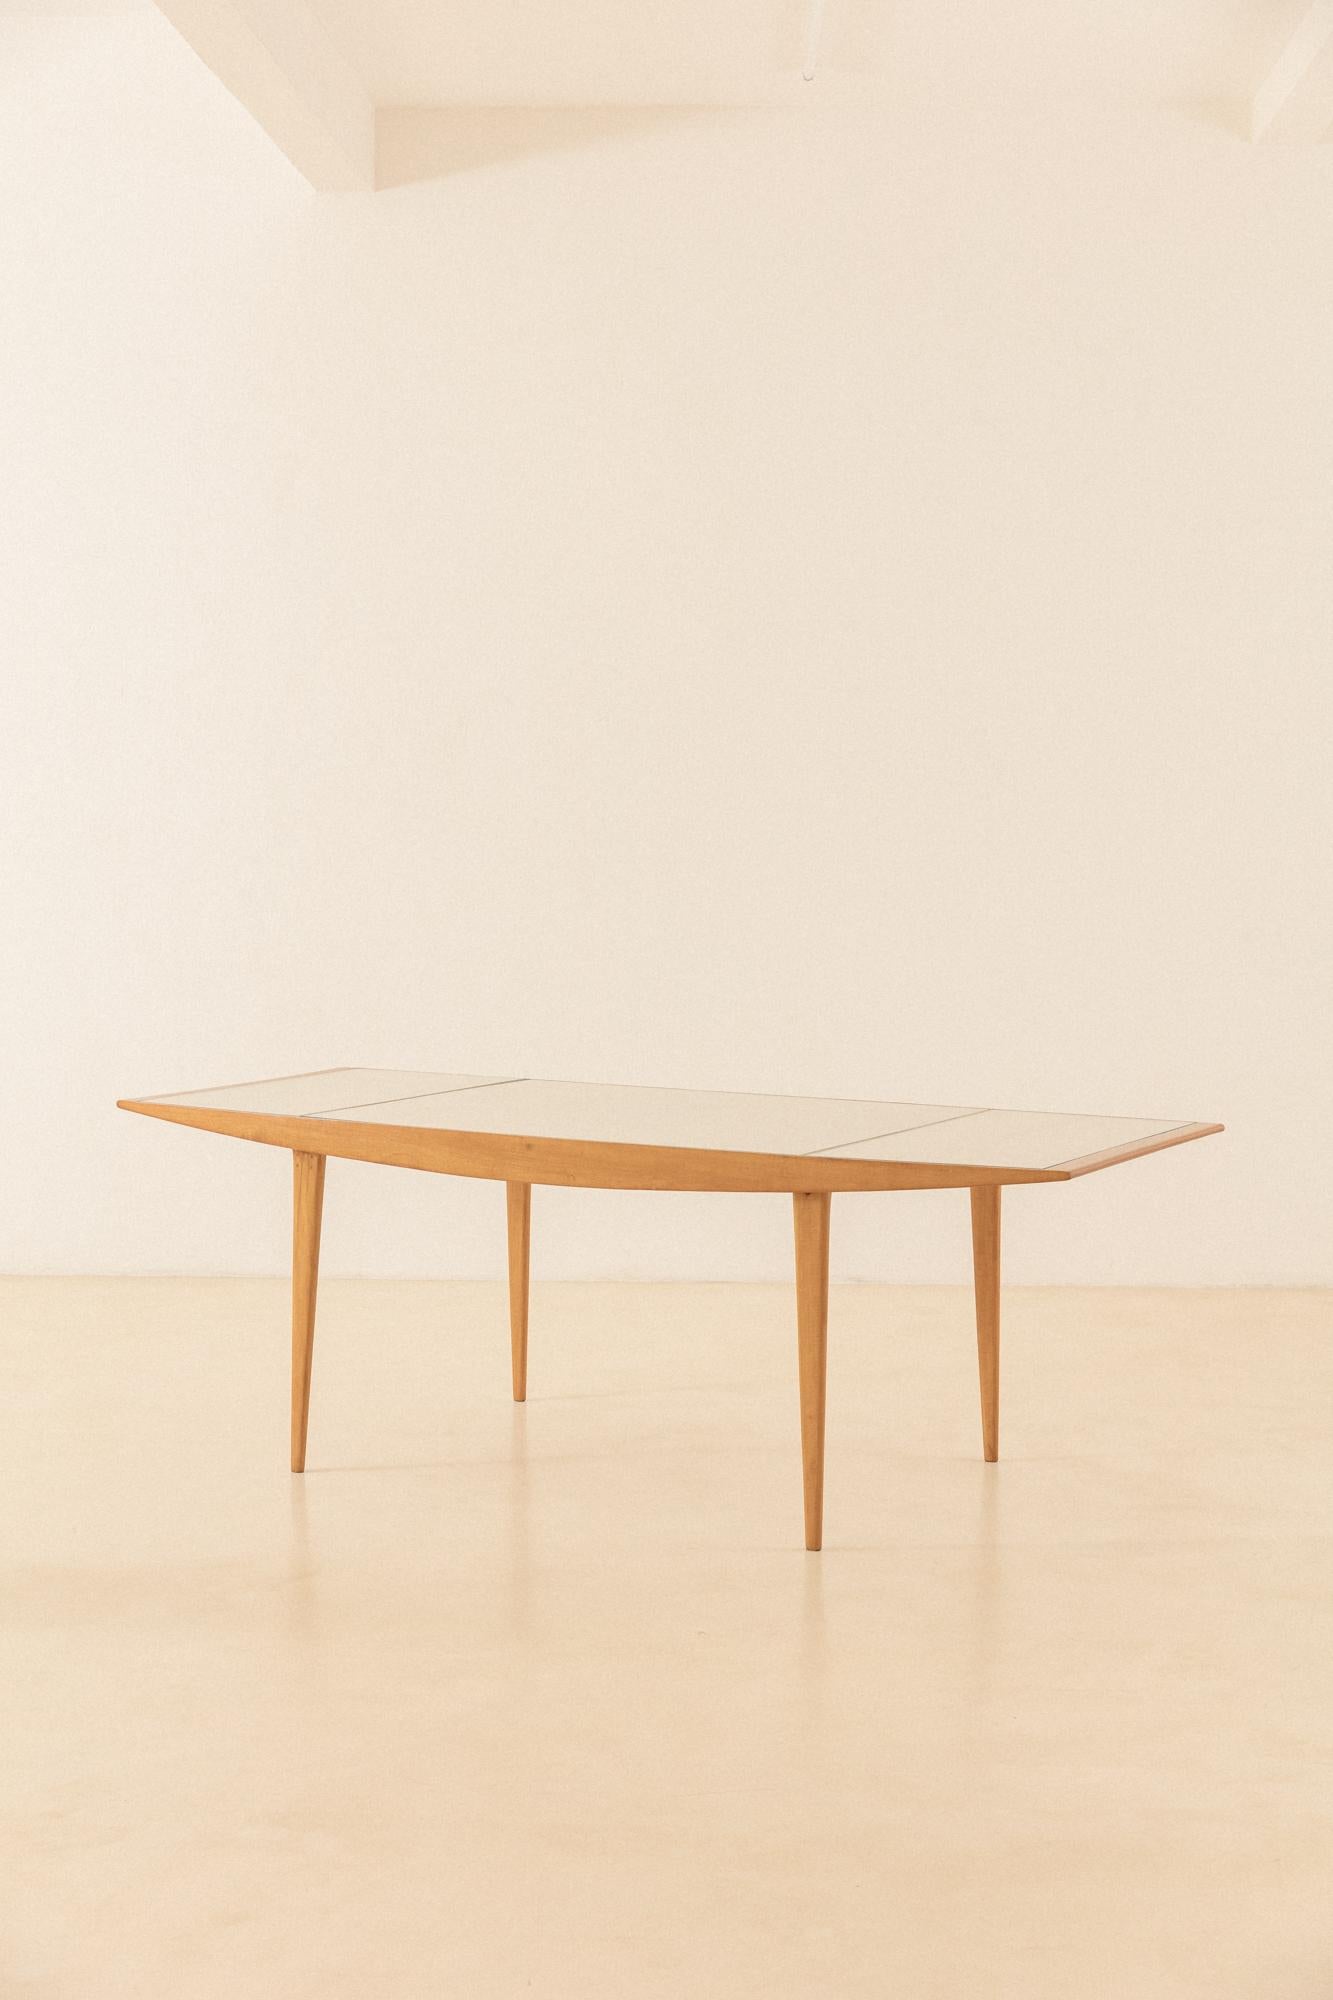 Carlo Hauner and Martin Eisler's pieces of furniture are highly designed and well-executed, with ingenious constructive details – very distinctive of any production of the time in Brazil. This dining table made of Pau-Marfim wood with Cane is an